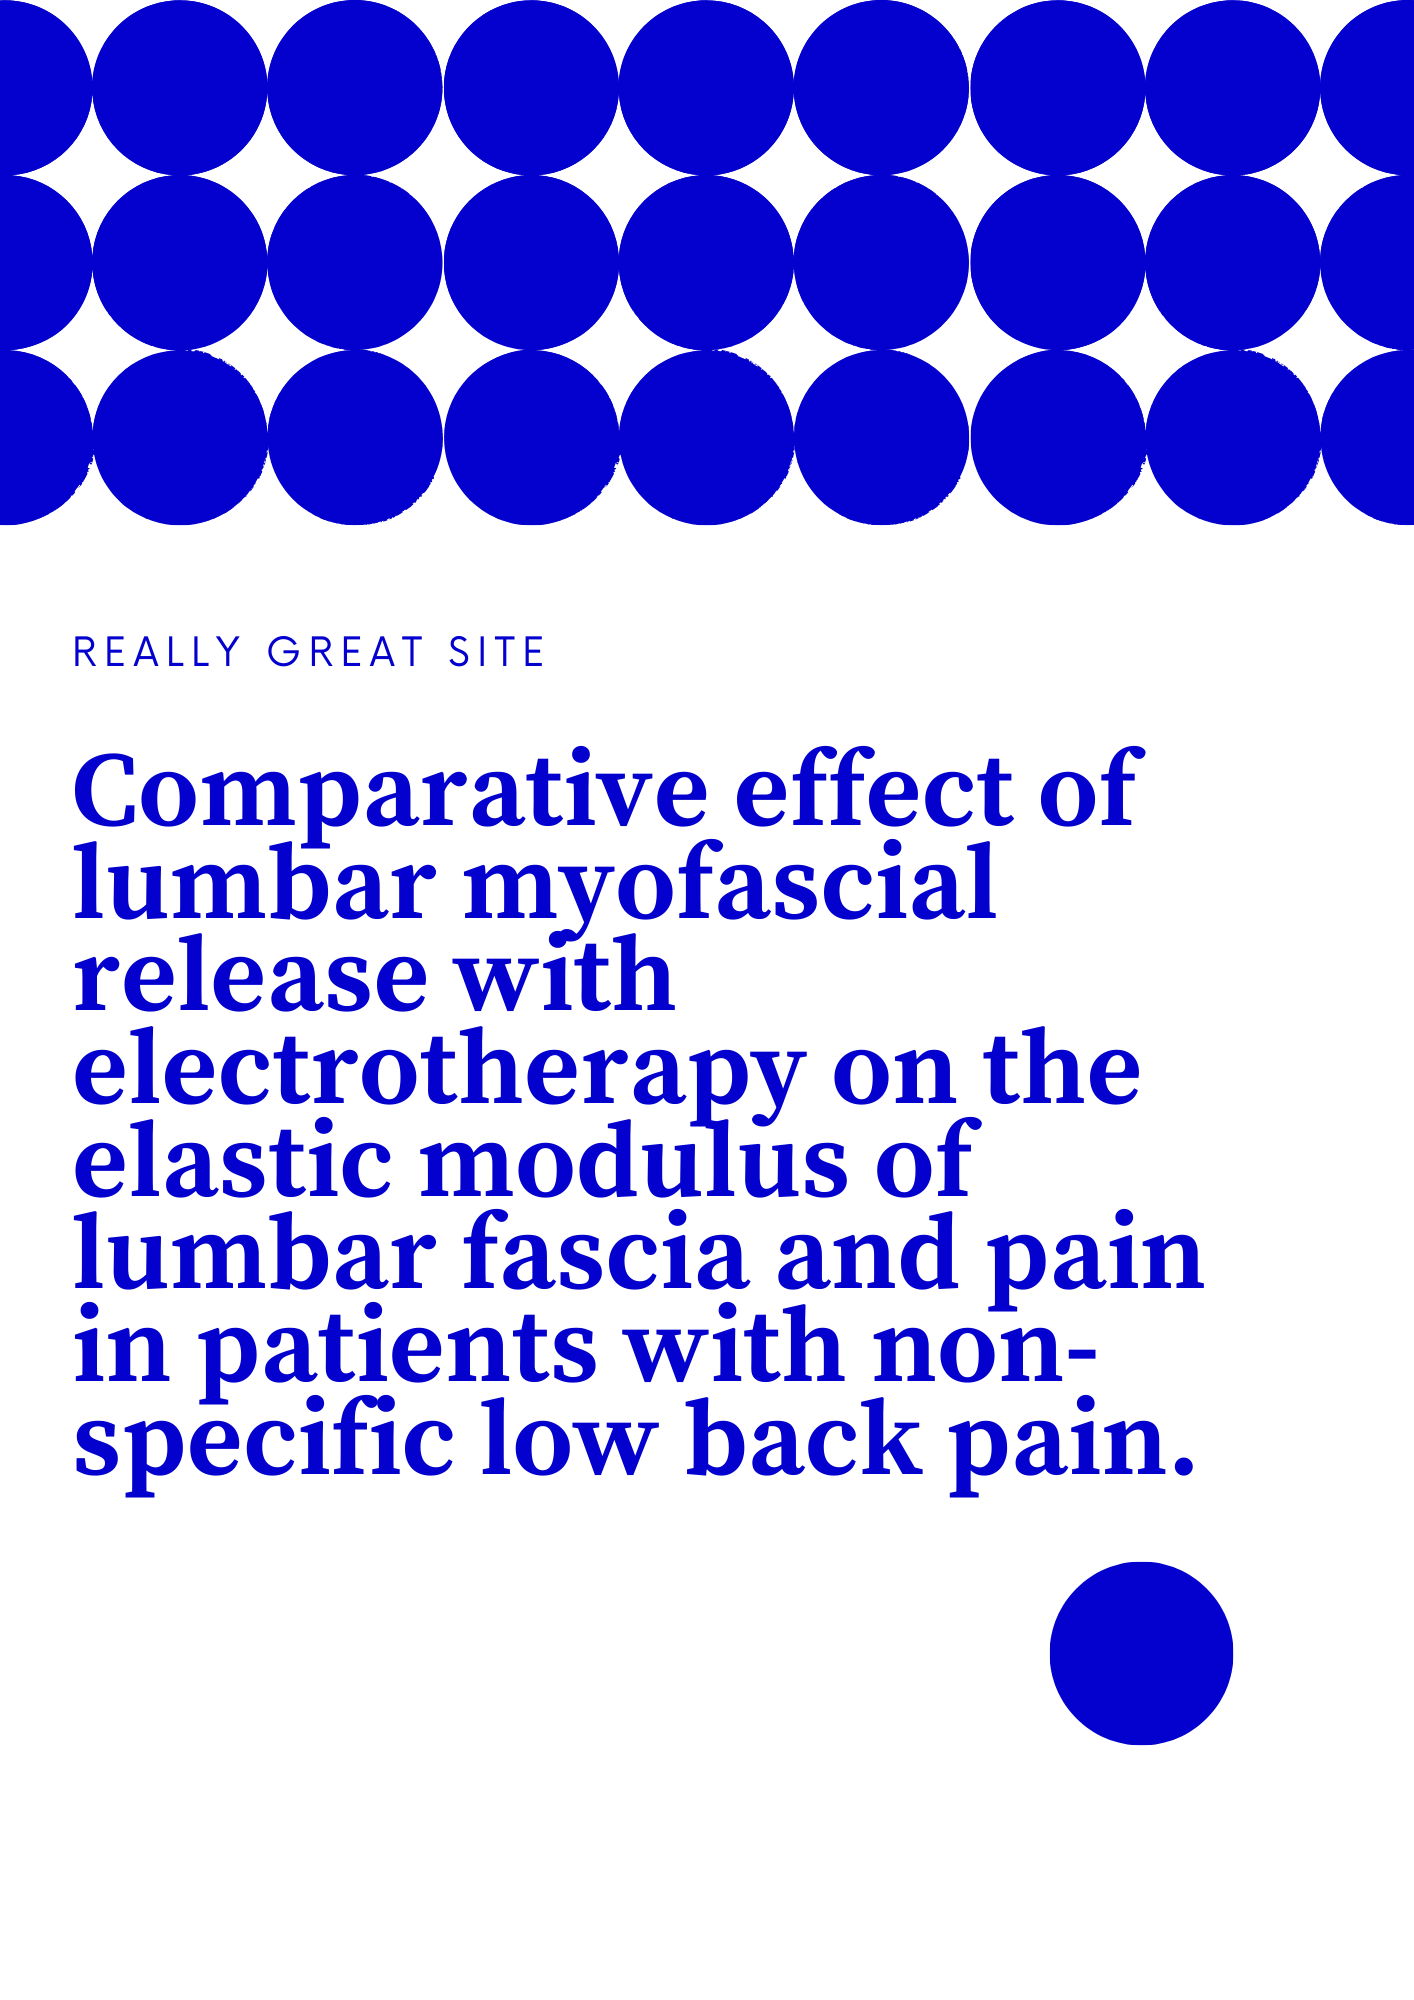 Comparative effect of lumbar myofascial release with electrotherapy on the elastic modulus of lumbar fascia and pain in patients with non-specific low back pain.